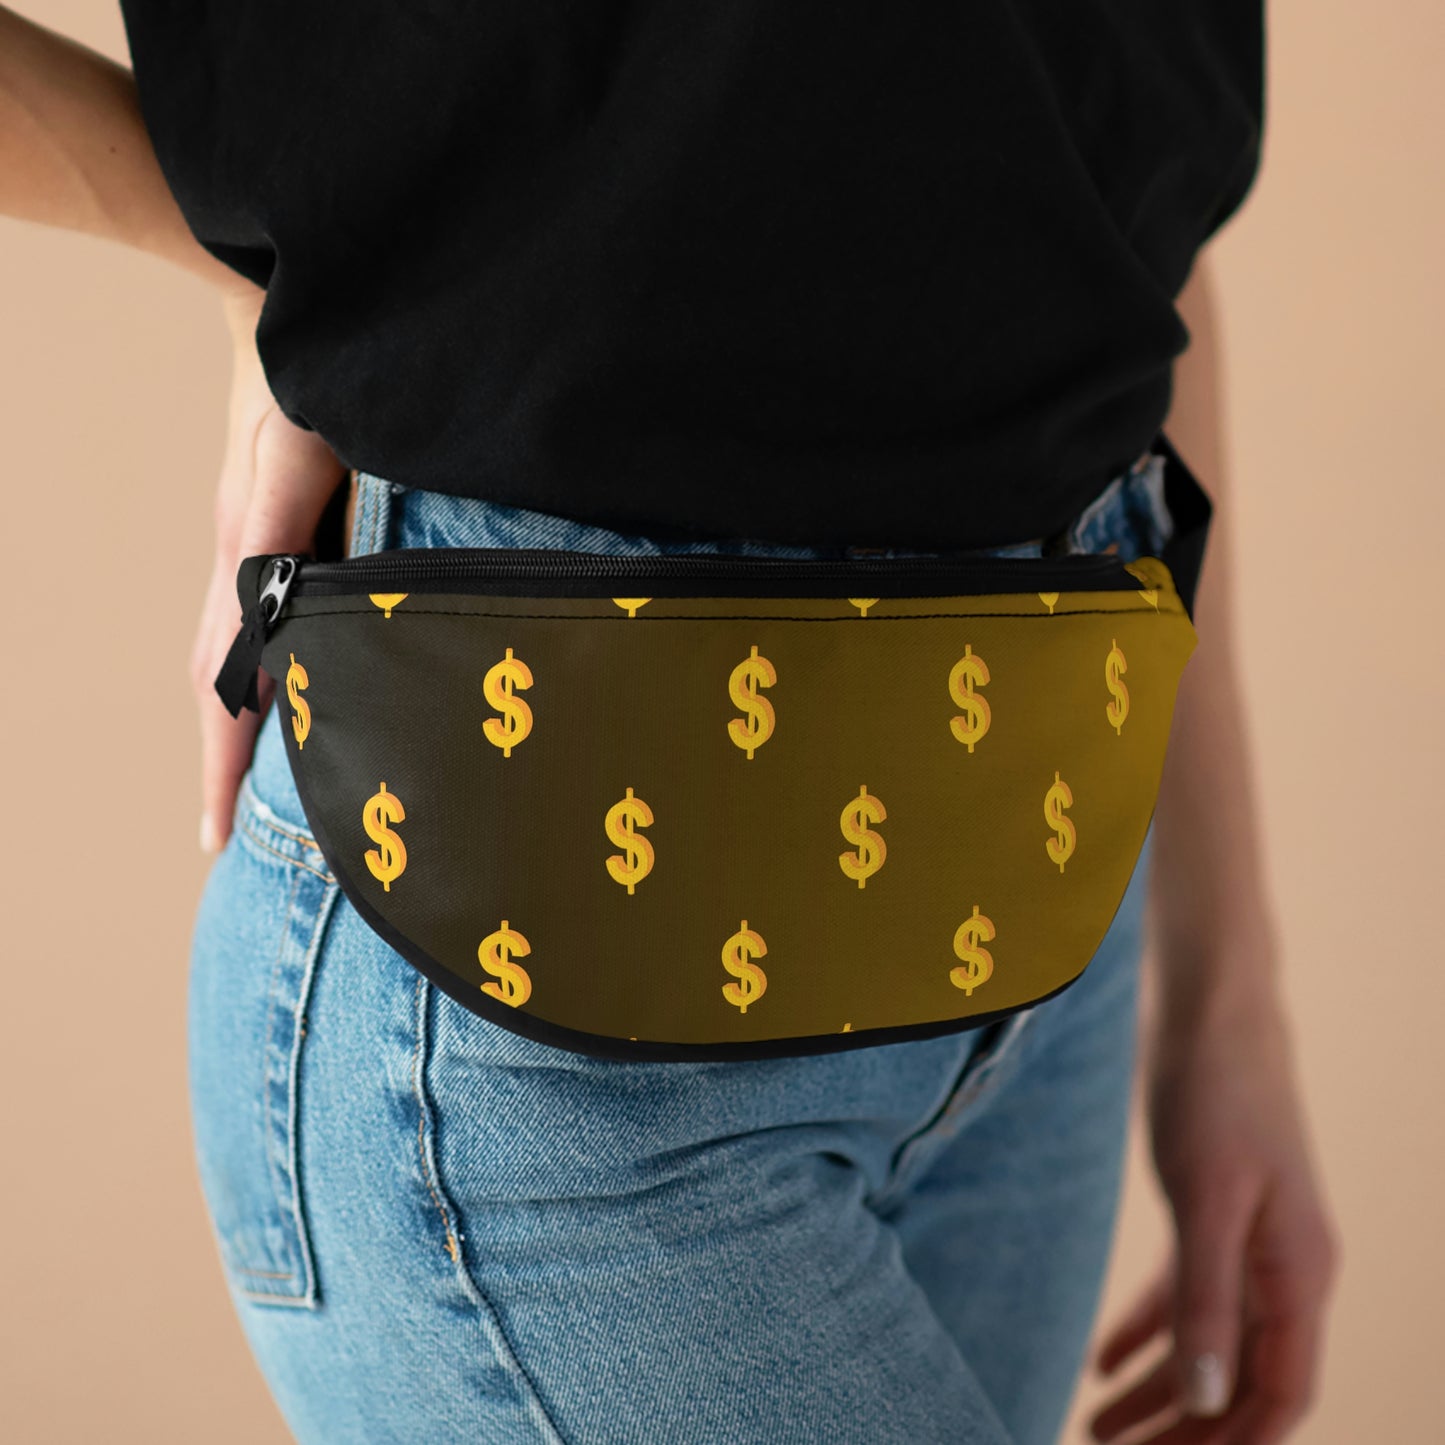 Big Money Fanny Pack with Dollar Signs on Dark Background